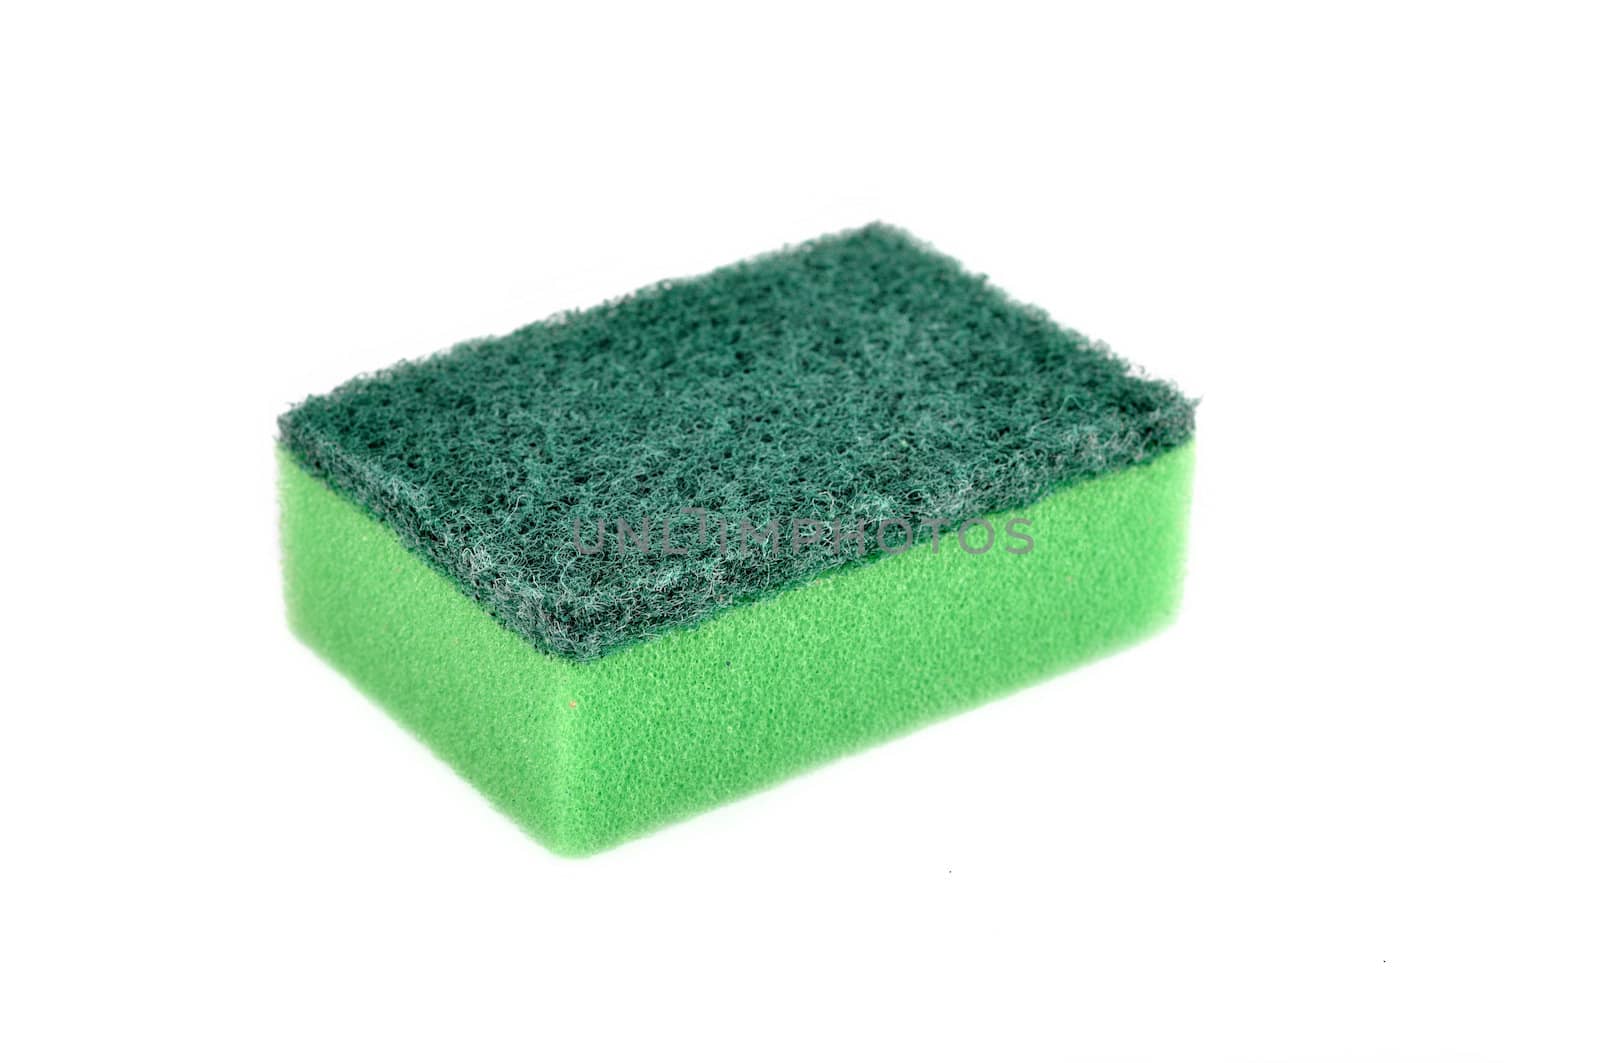 A green sponge dish isolated on white by Rainman